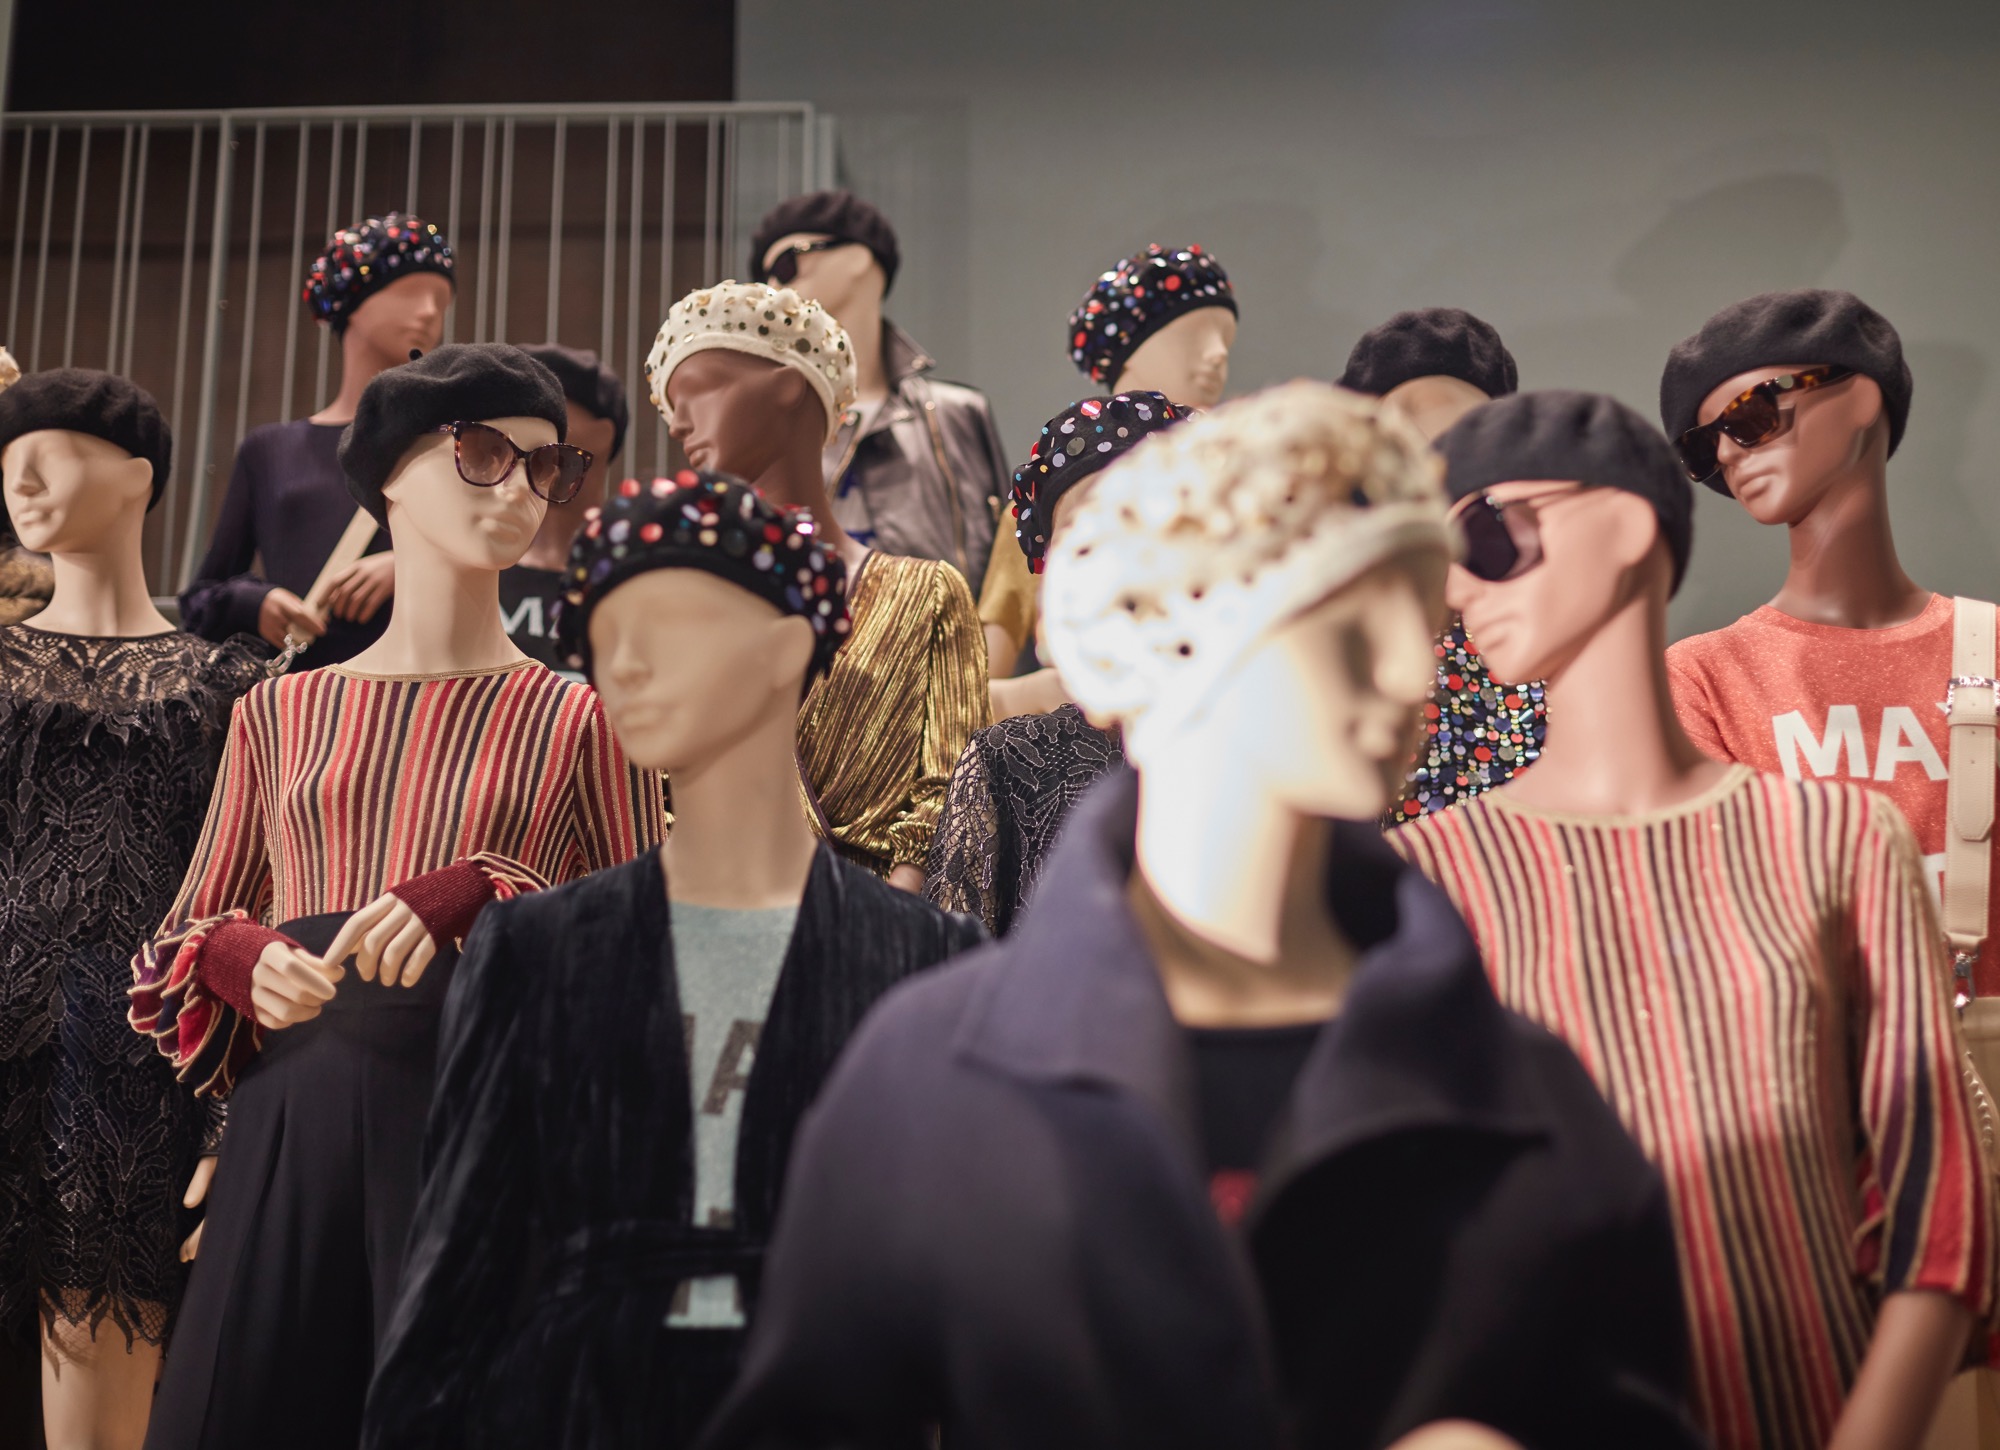 Max & Co. Milan Tribe Mannequins